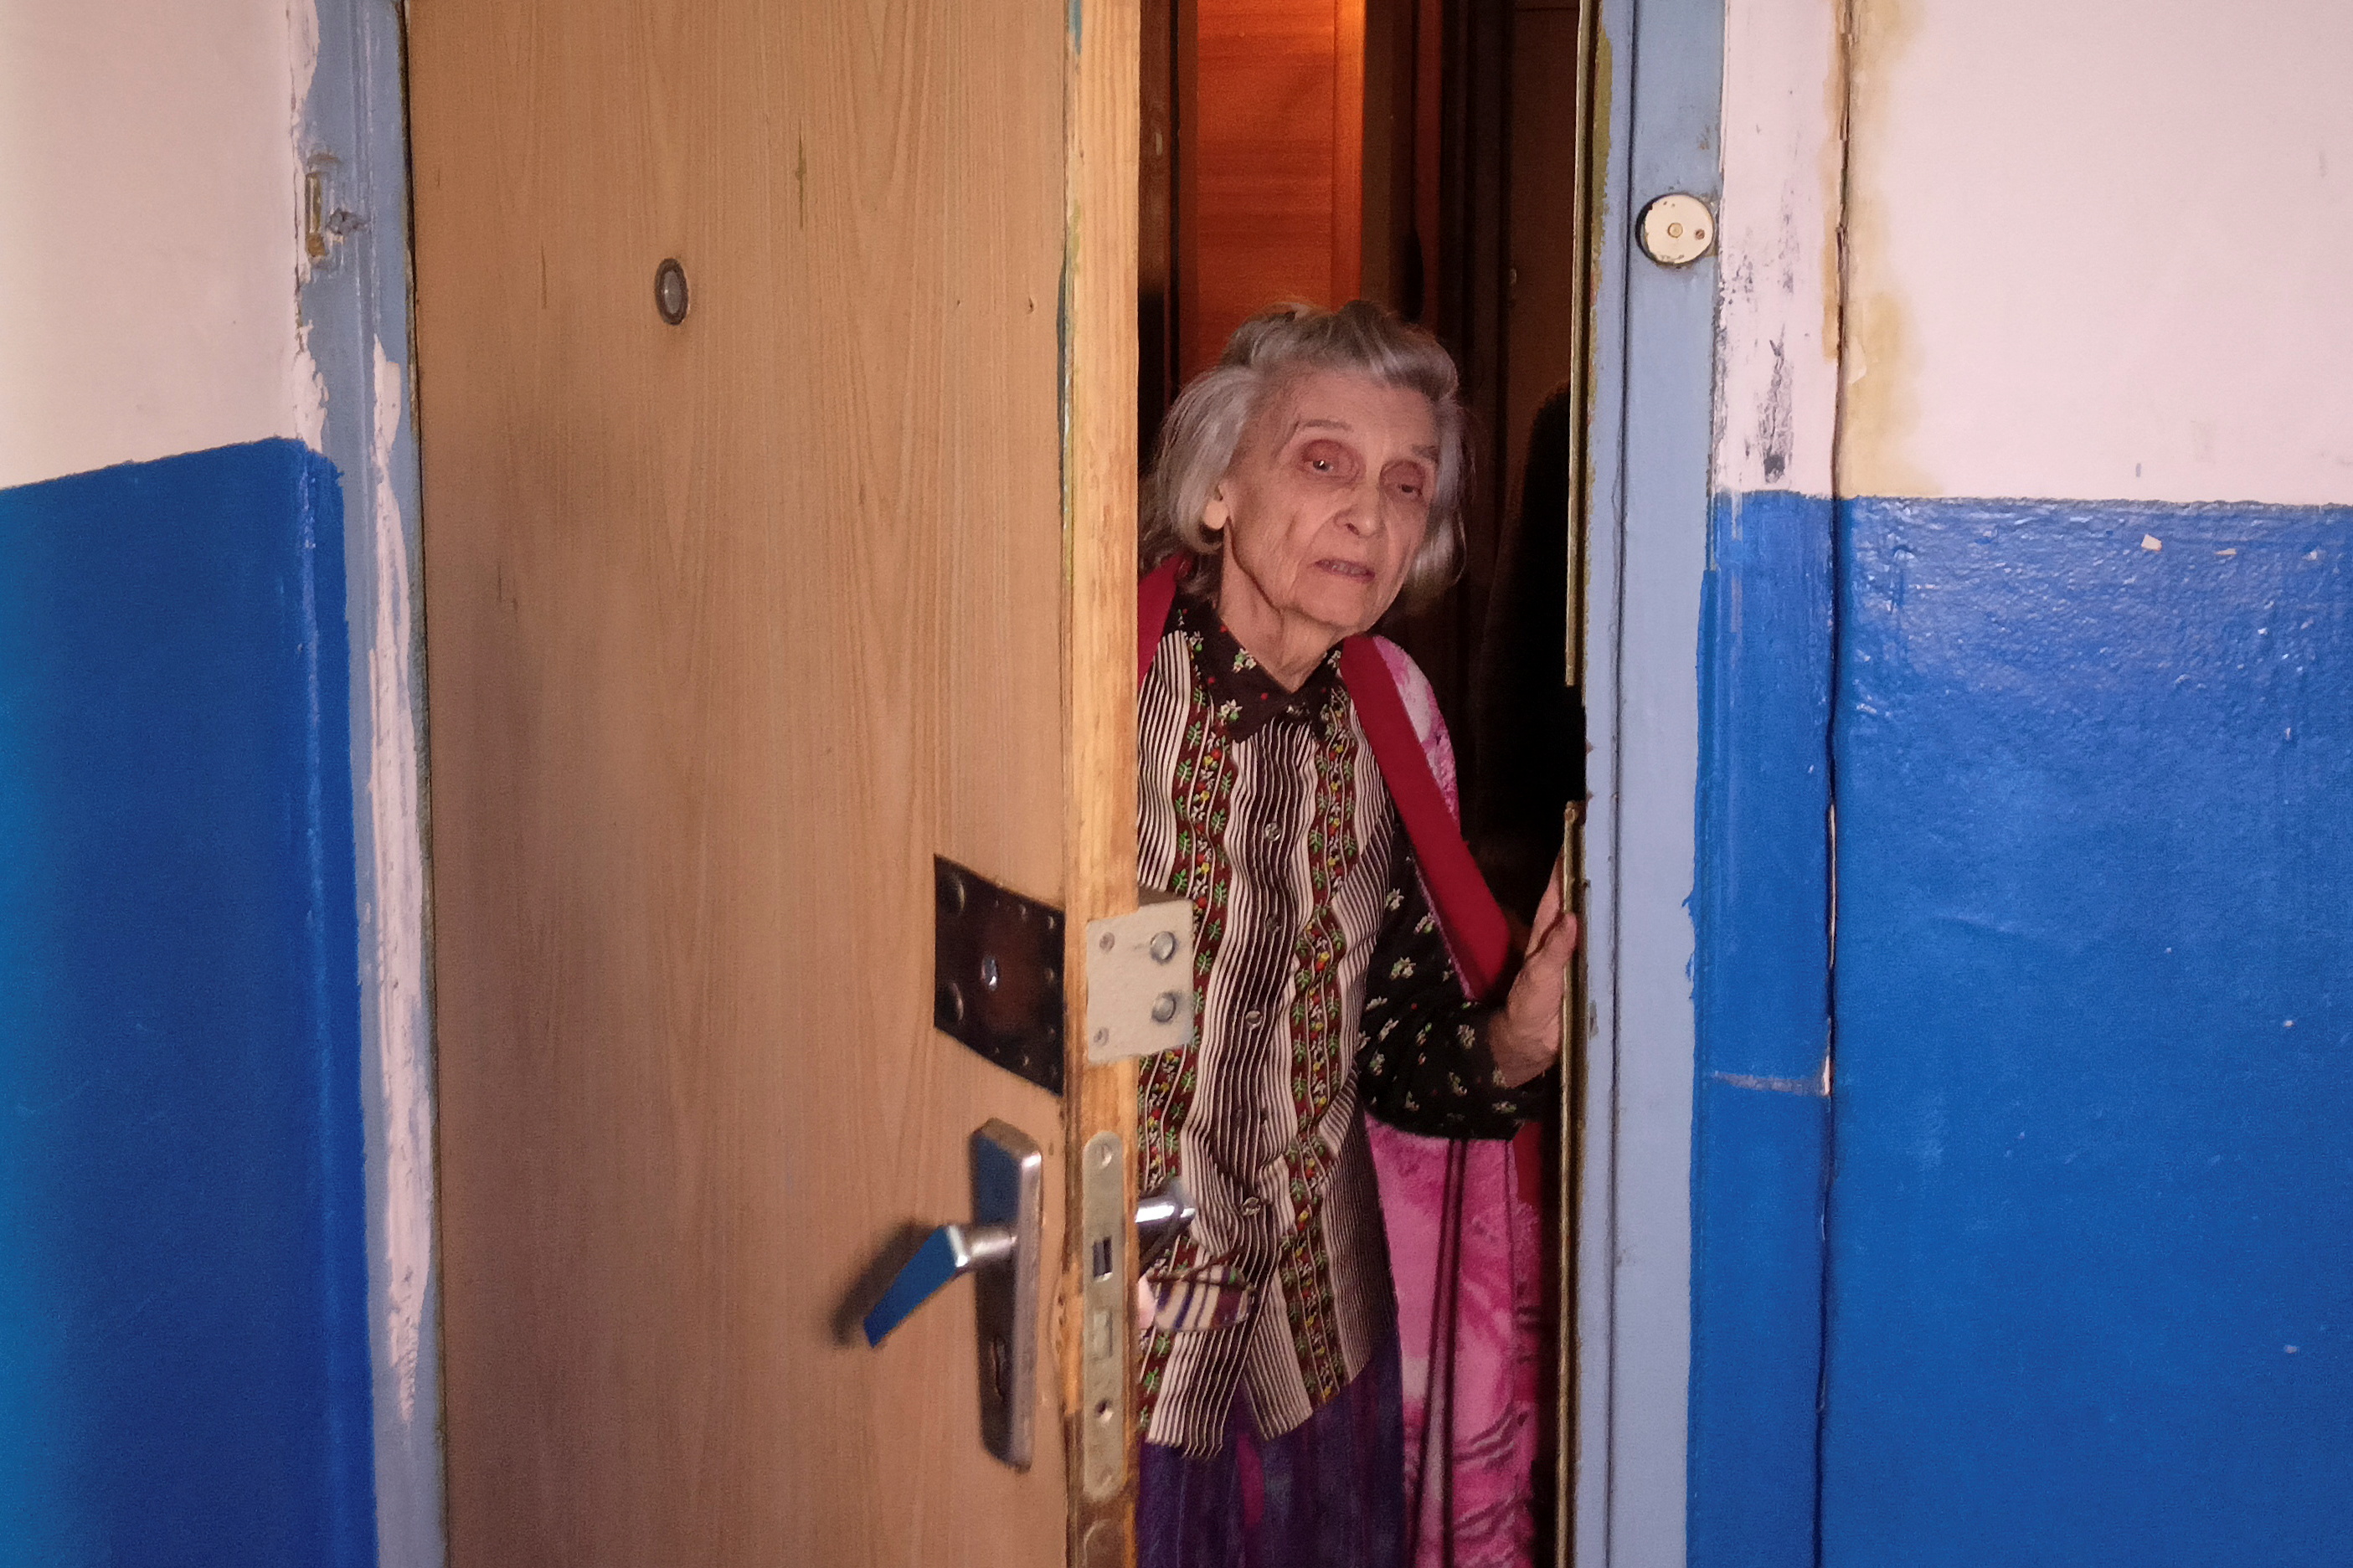 Margarita Morozova, 87, who survived the siege of Leningrad during World War II, looks out of her apartment in Kharkiv